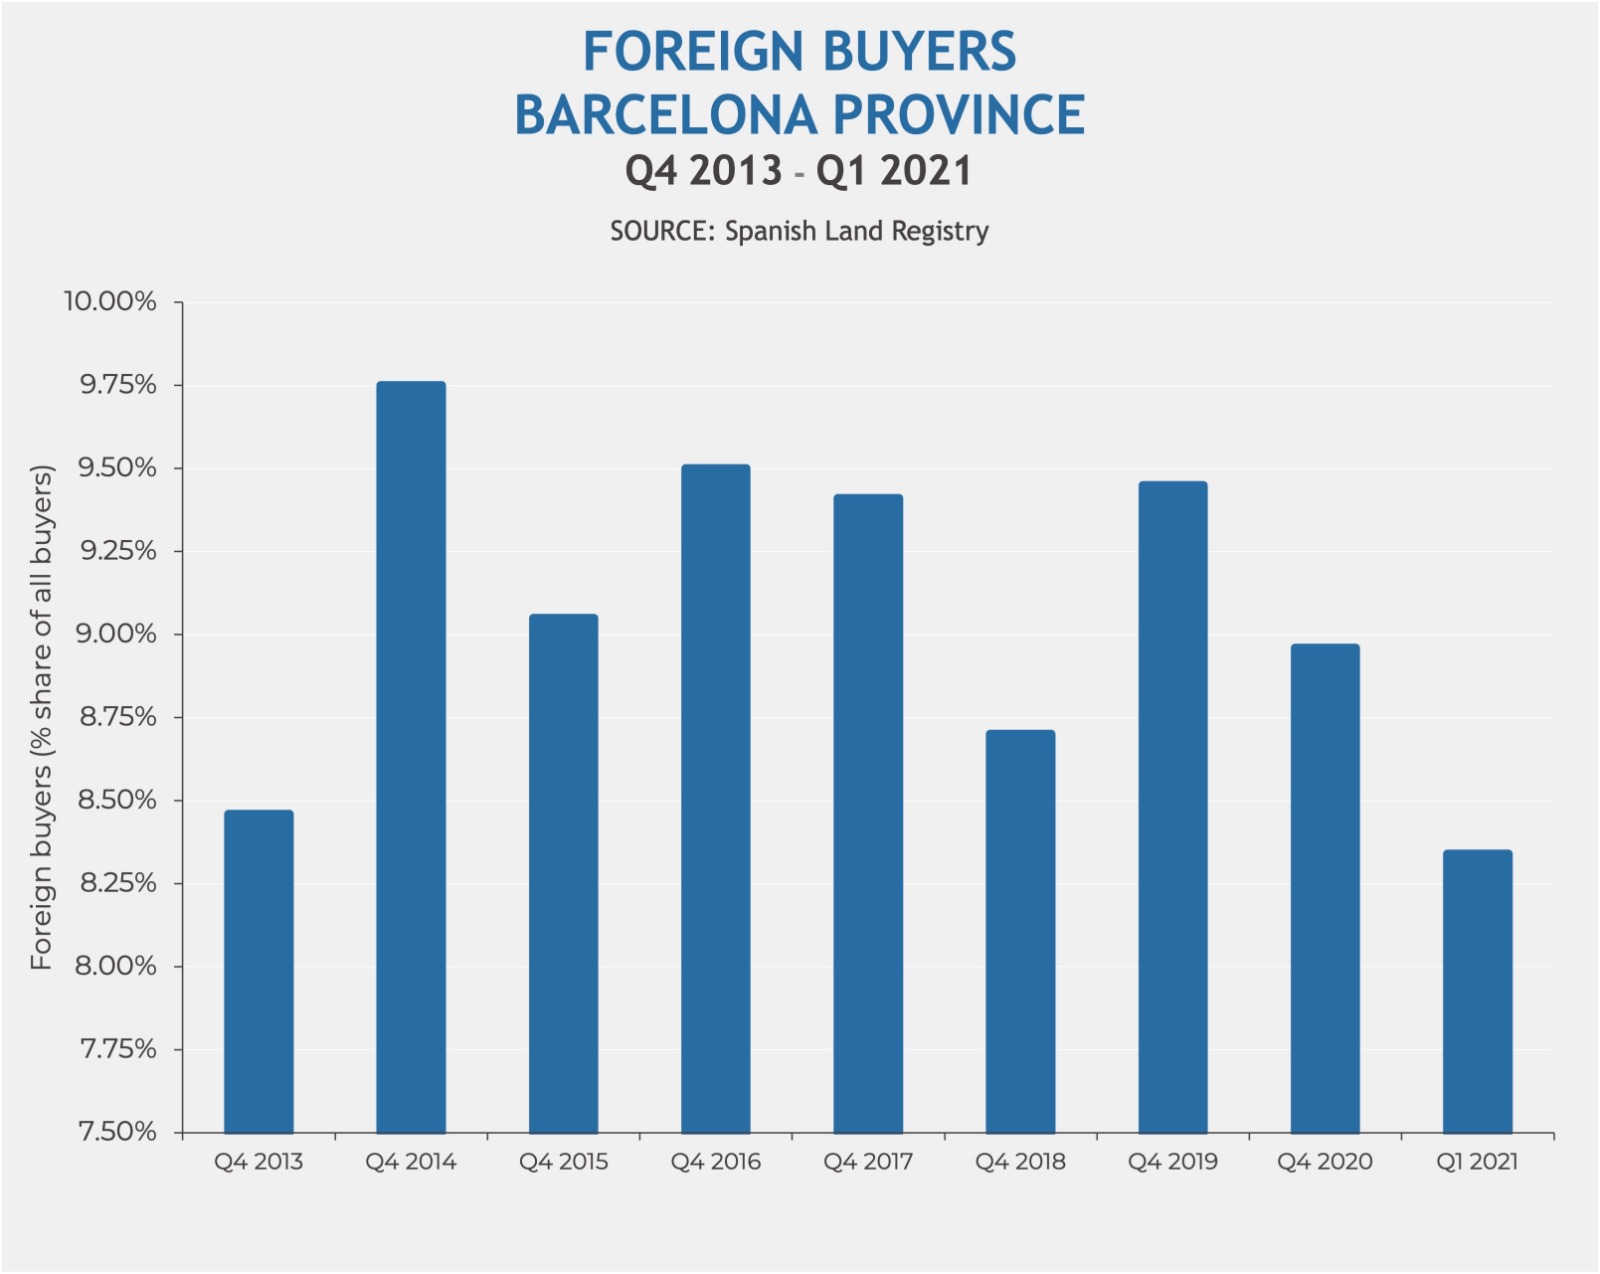 Foreign buyers in Barcelona province